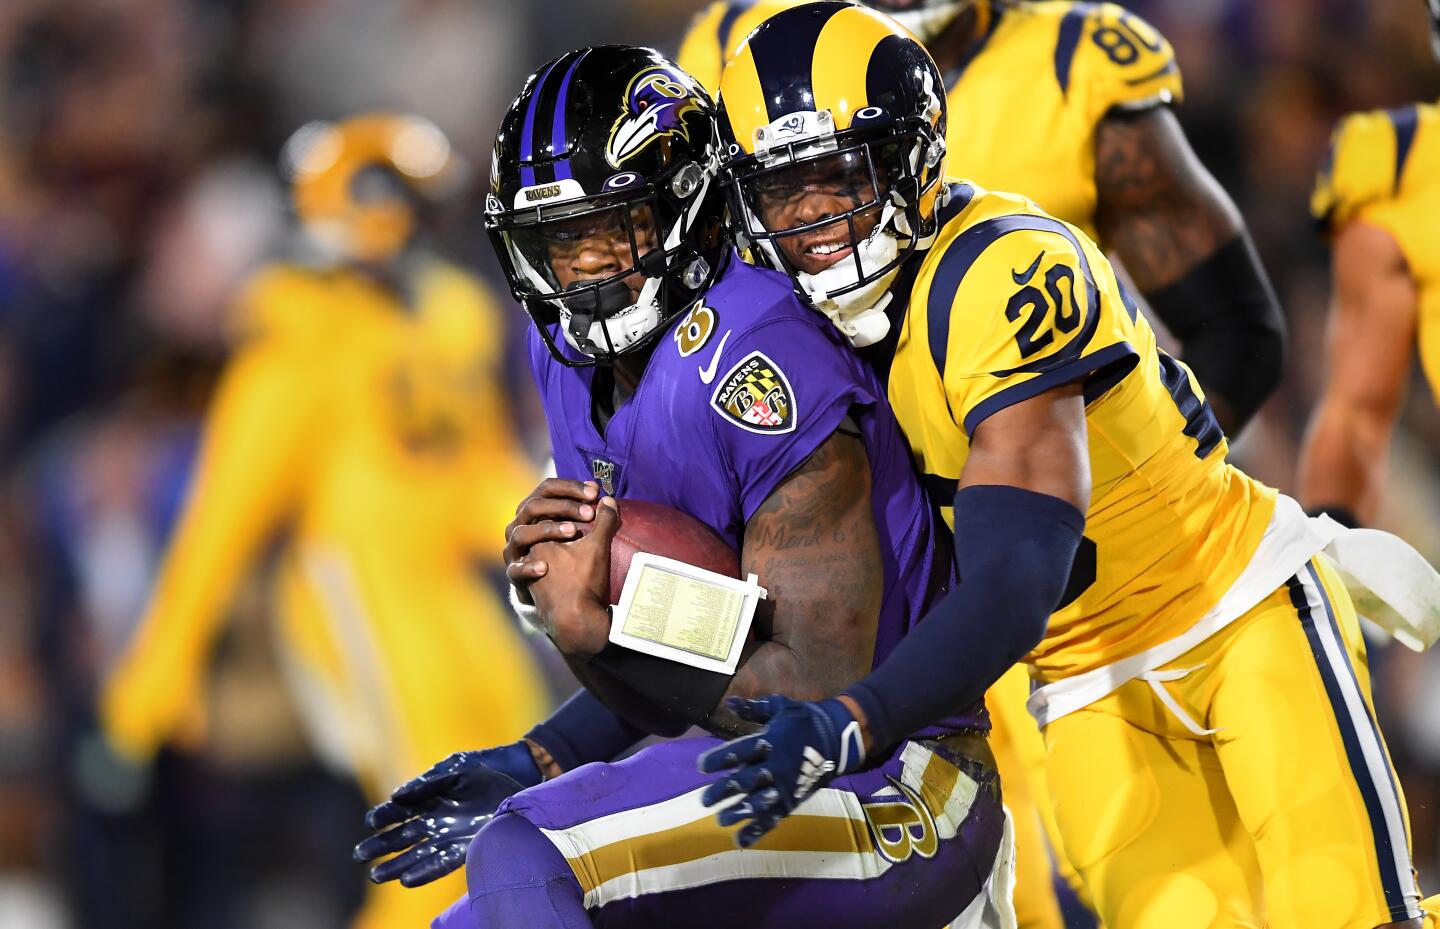 Ravens quarterback Lamar Jackson is stopped short of the goal line by the Rams' Jalen Ramsey during the second quarter of a game Nov. 25 at the Coliseum.